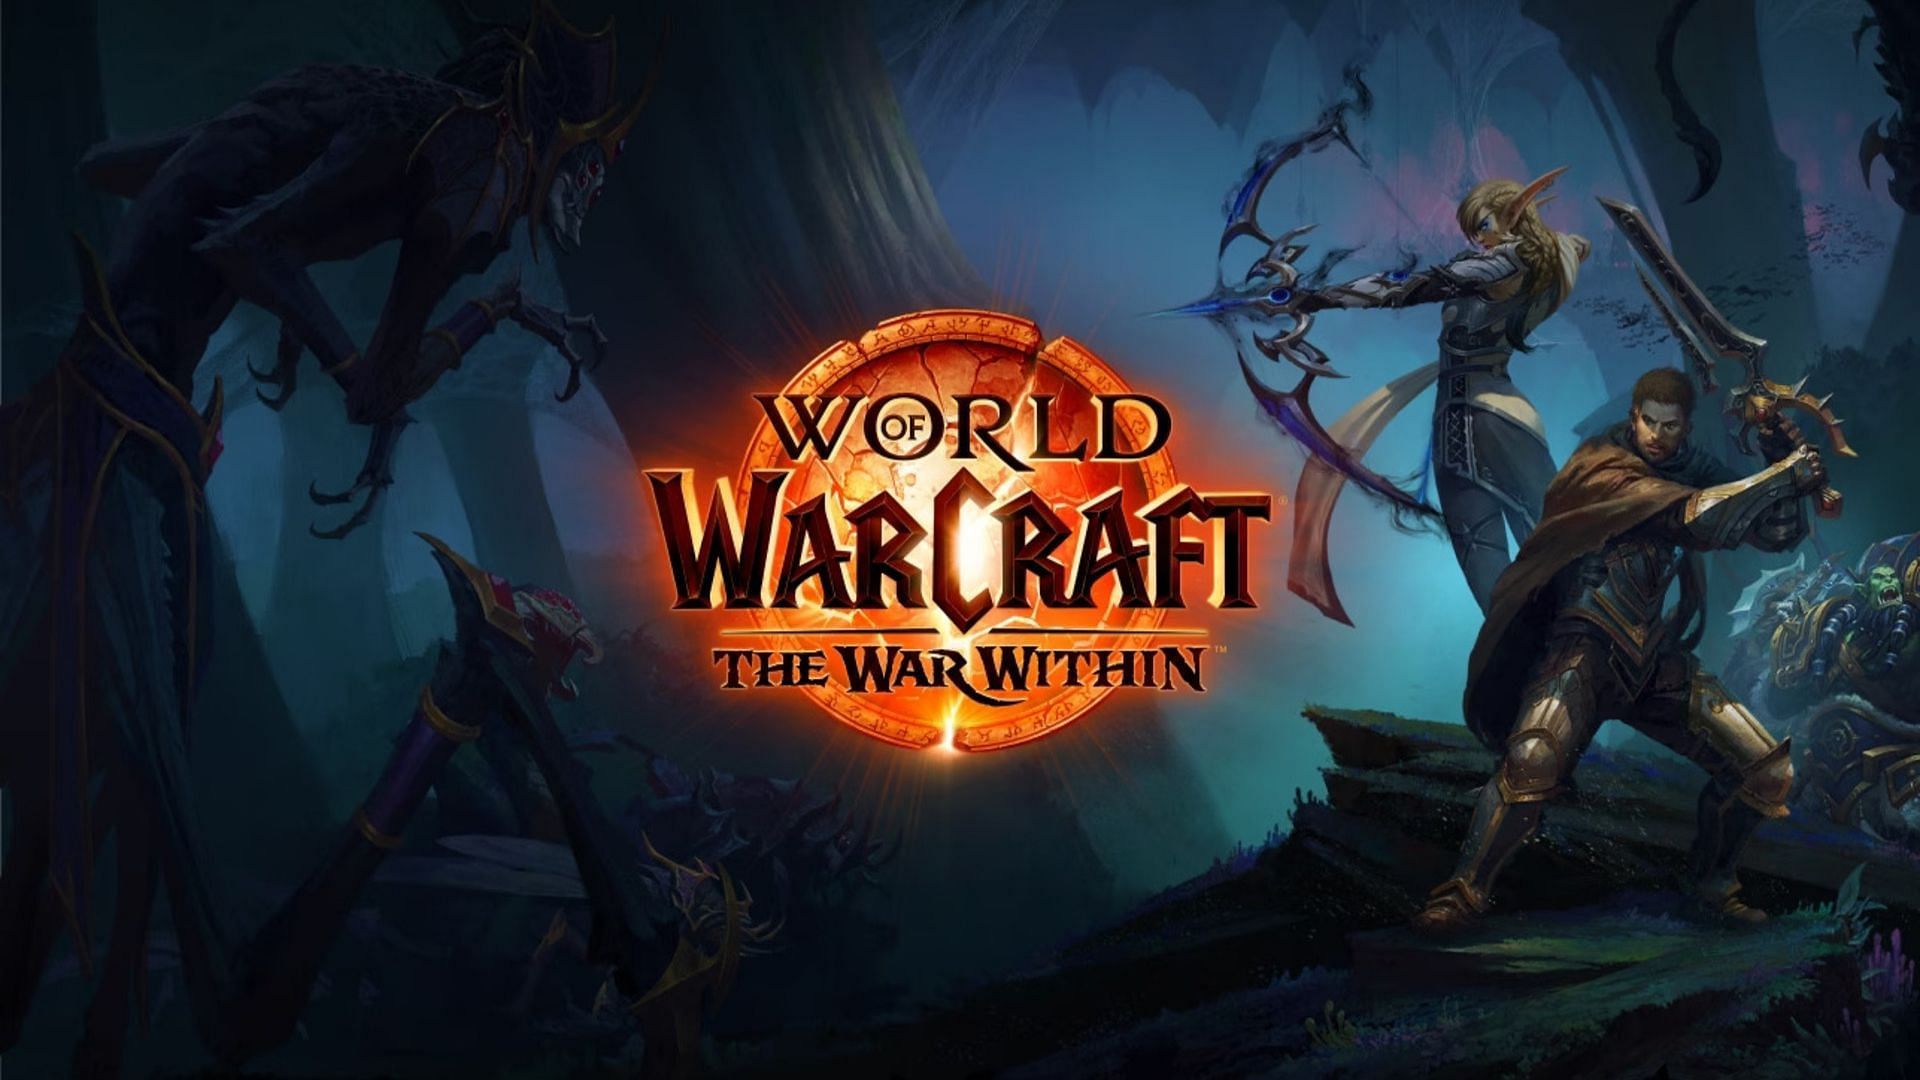 Brand new zones coming in World of Warcraft: War Within (Image via Blizzard)